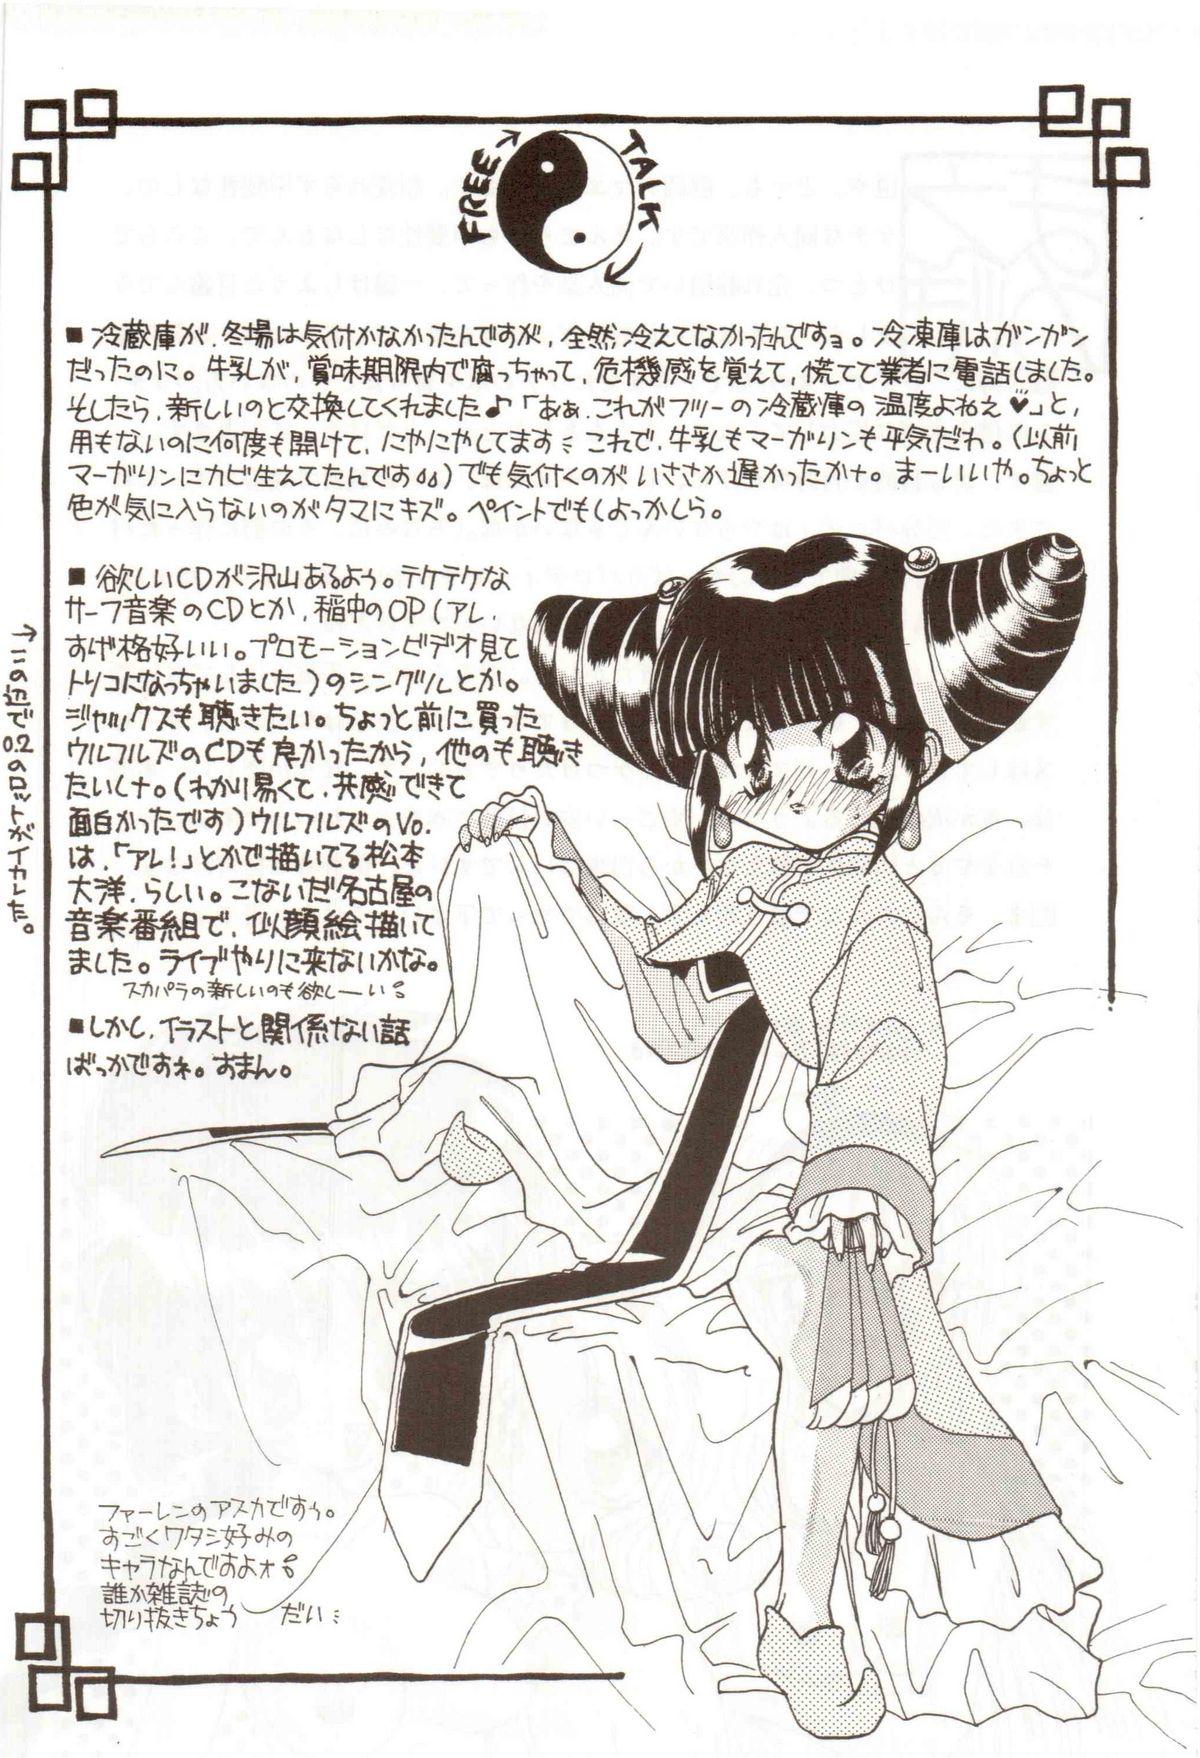 Morena Bakuhatsu On Parade - Magic knight rayearth Officesex - Page 5